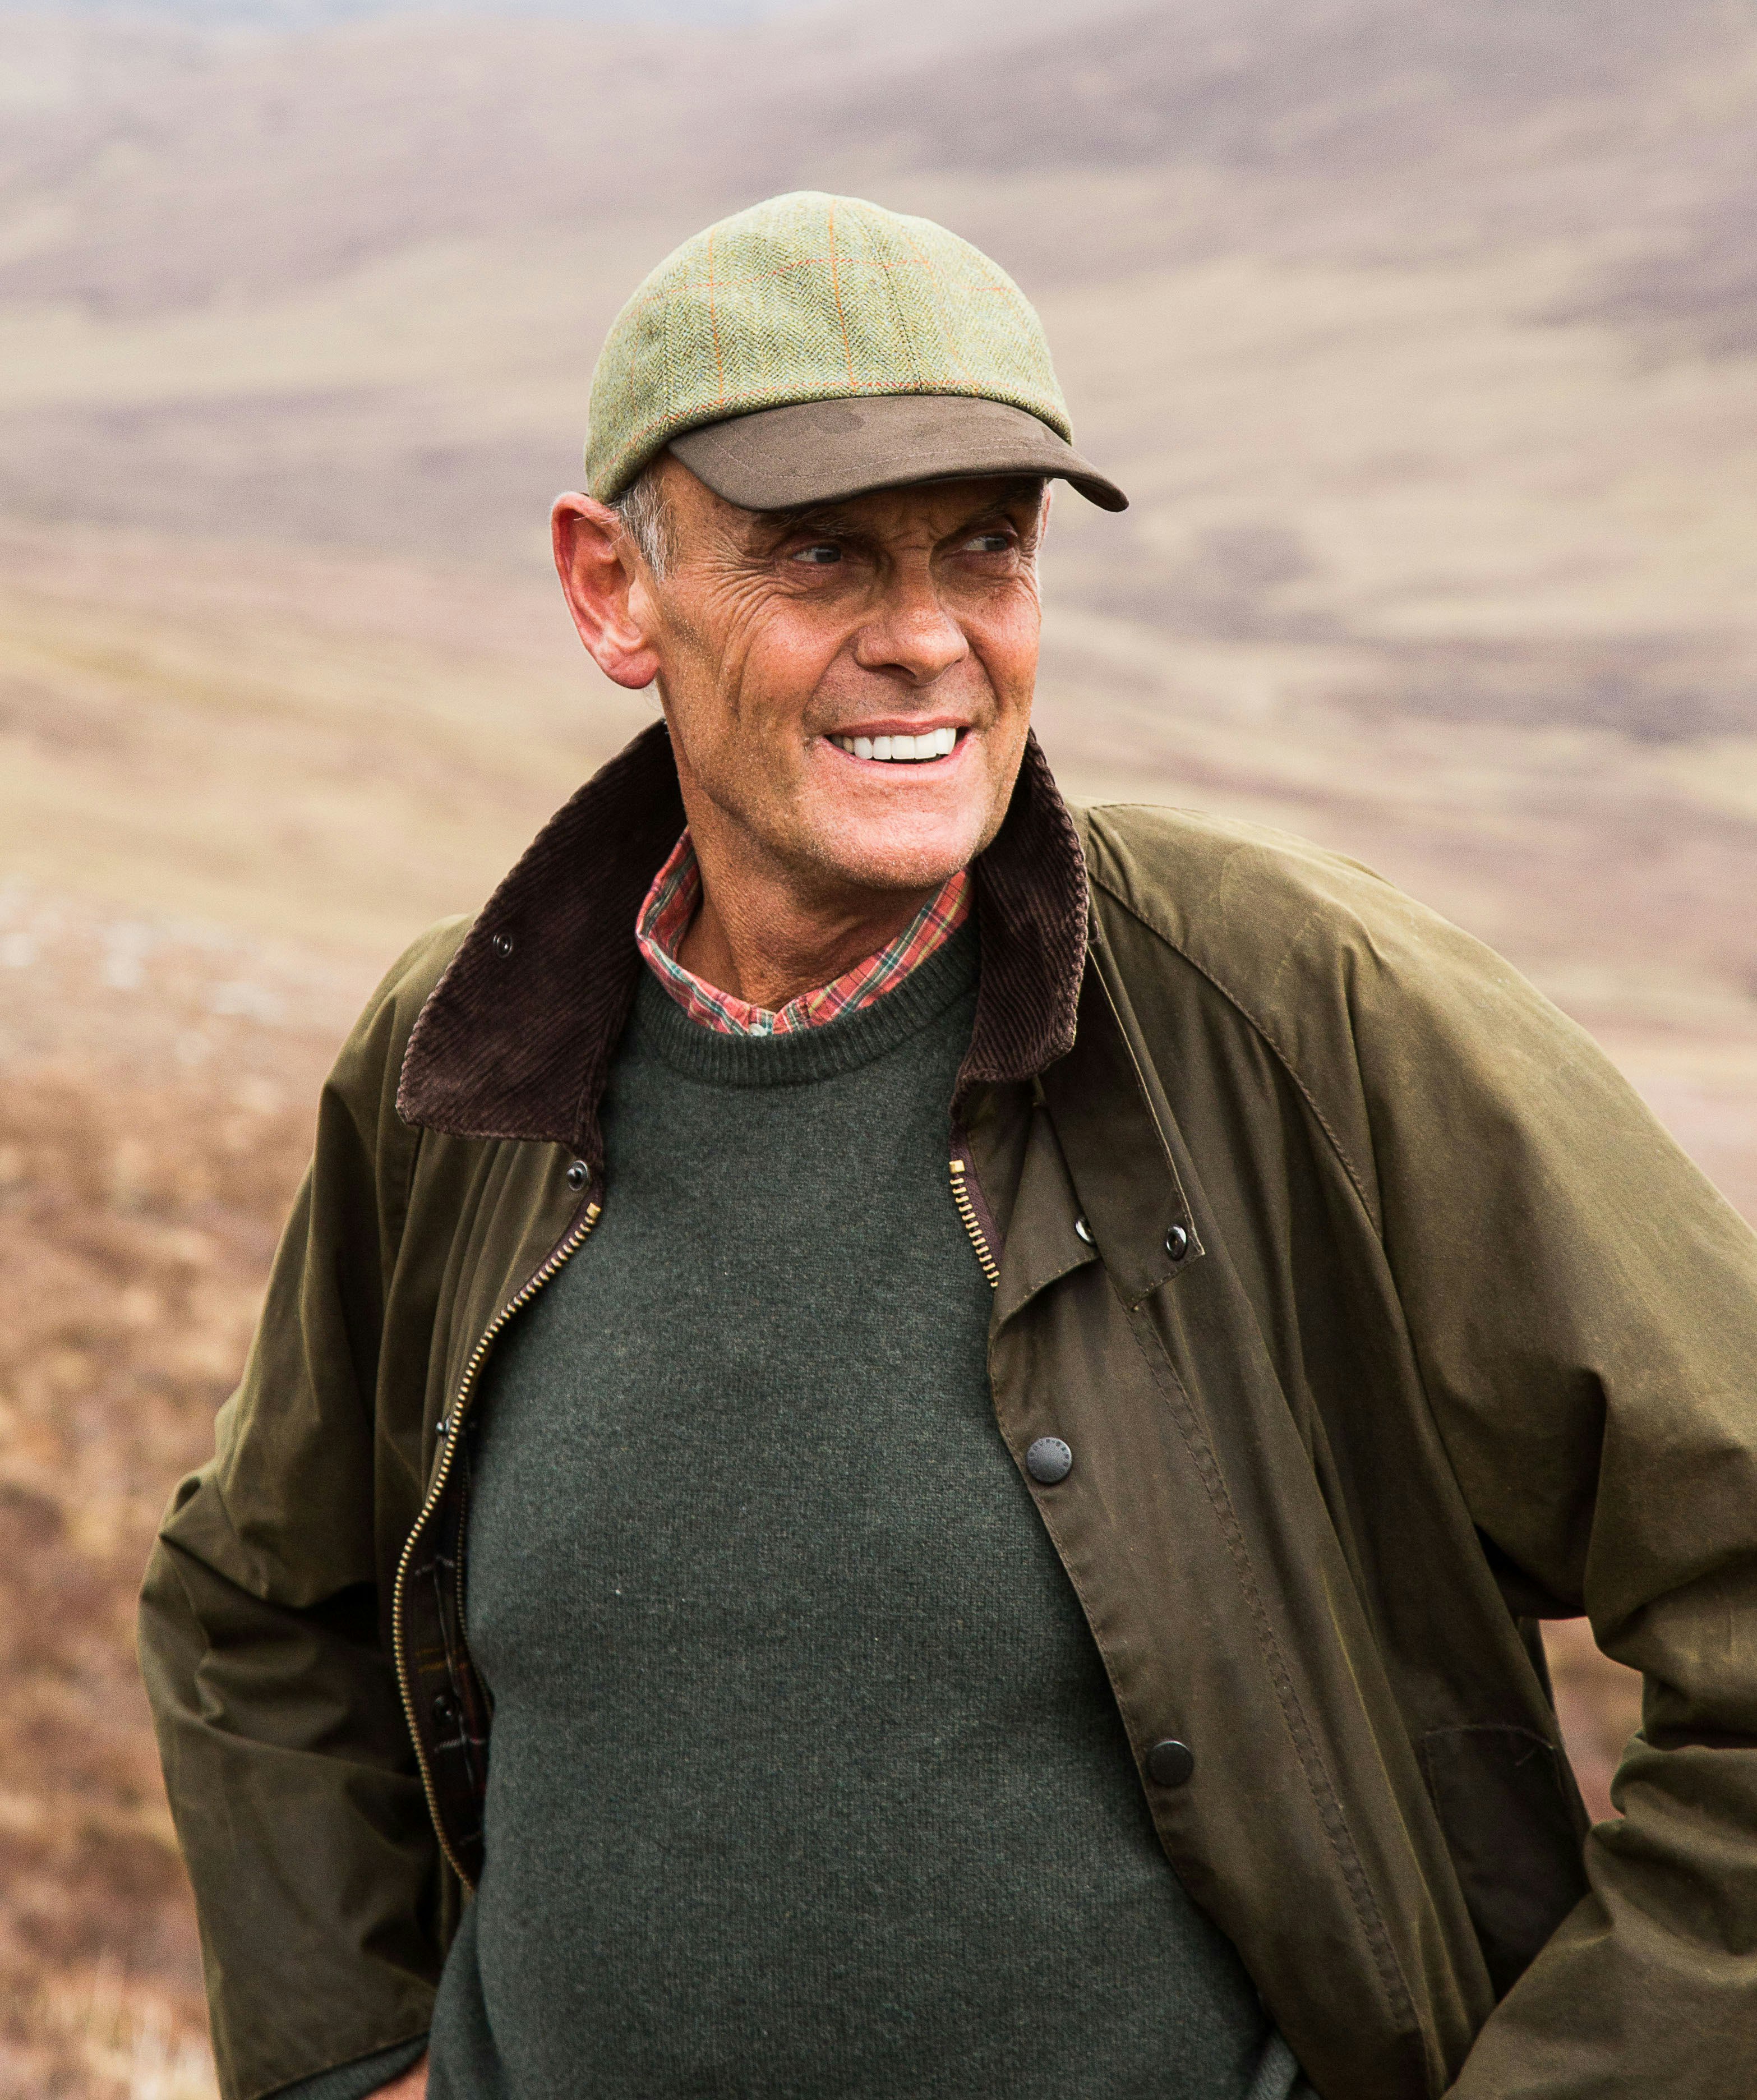 Paul Lister stands smiling; he's wearing a tweed baseball-style hat, with a red checkered shirt beneath a sweater and waterproof jacket.